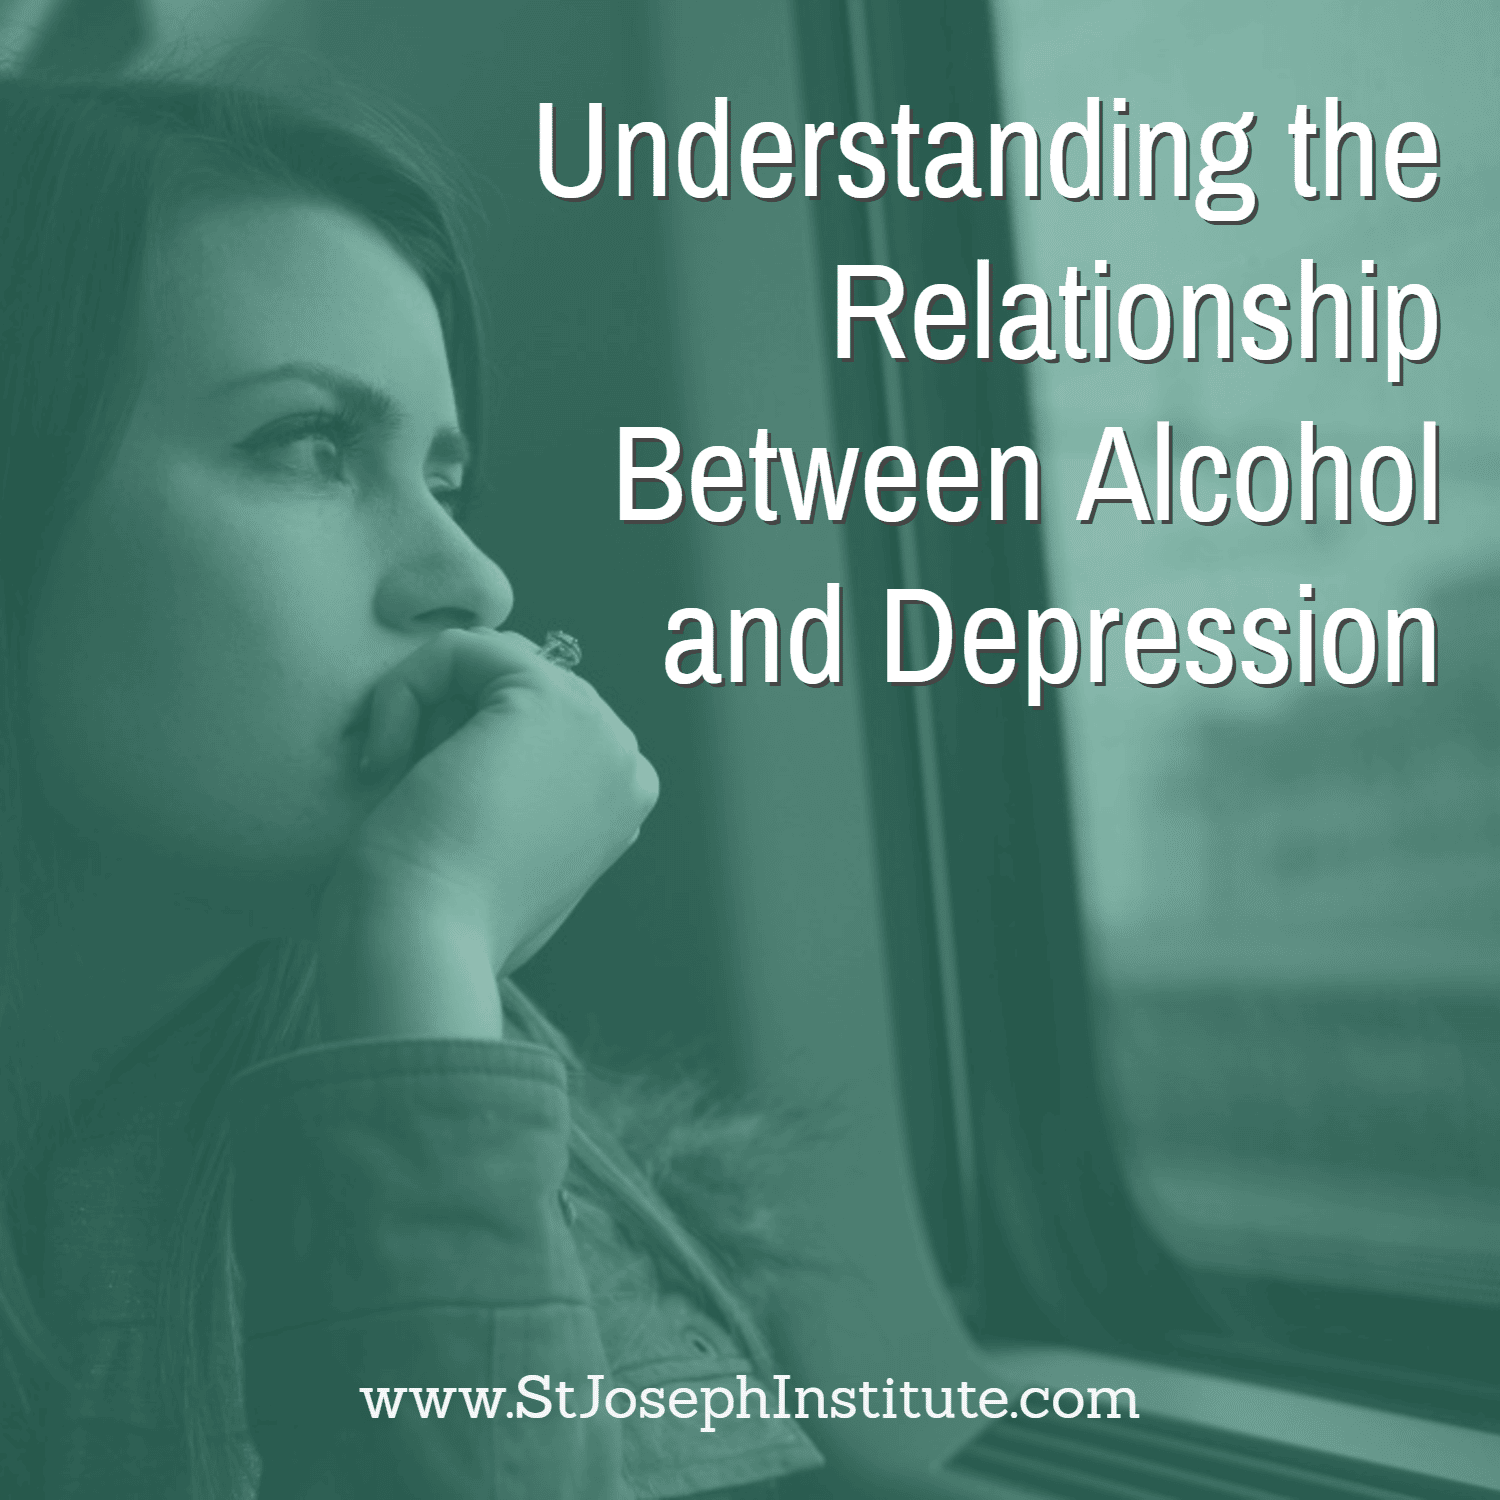 Understanding the Relationship Between Alcohol and Depression